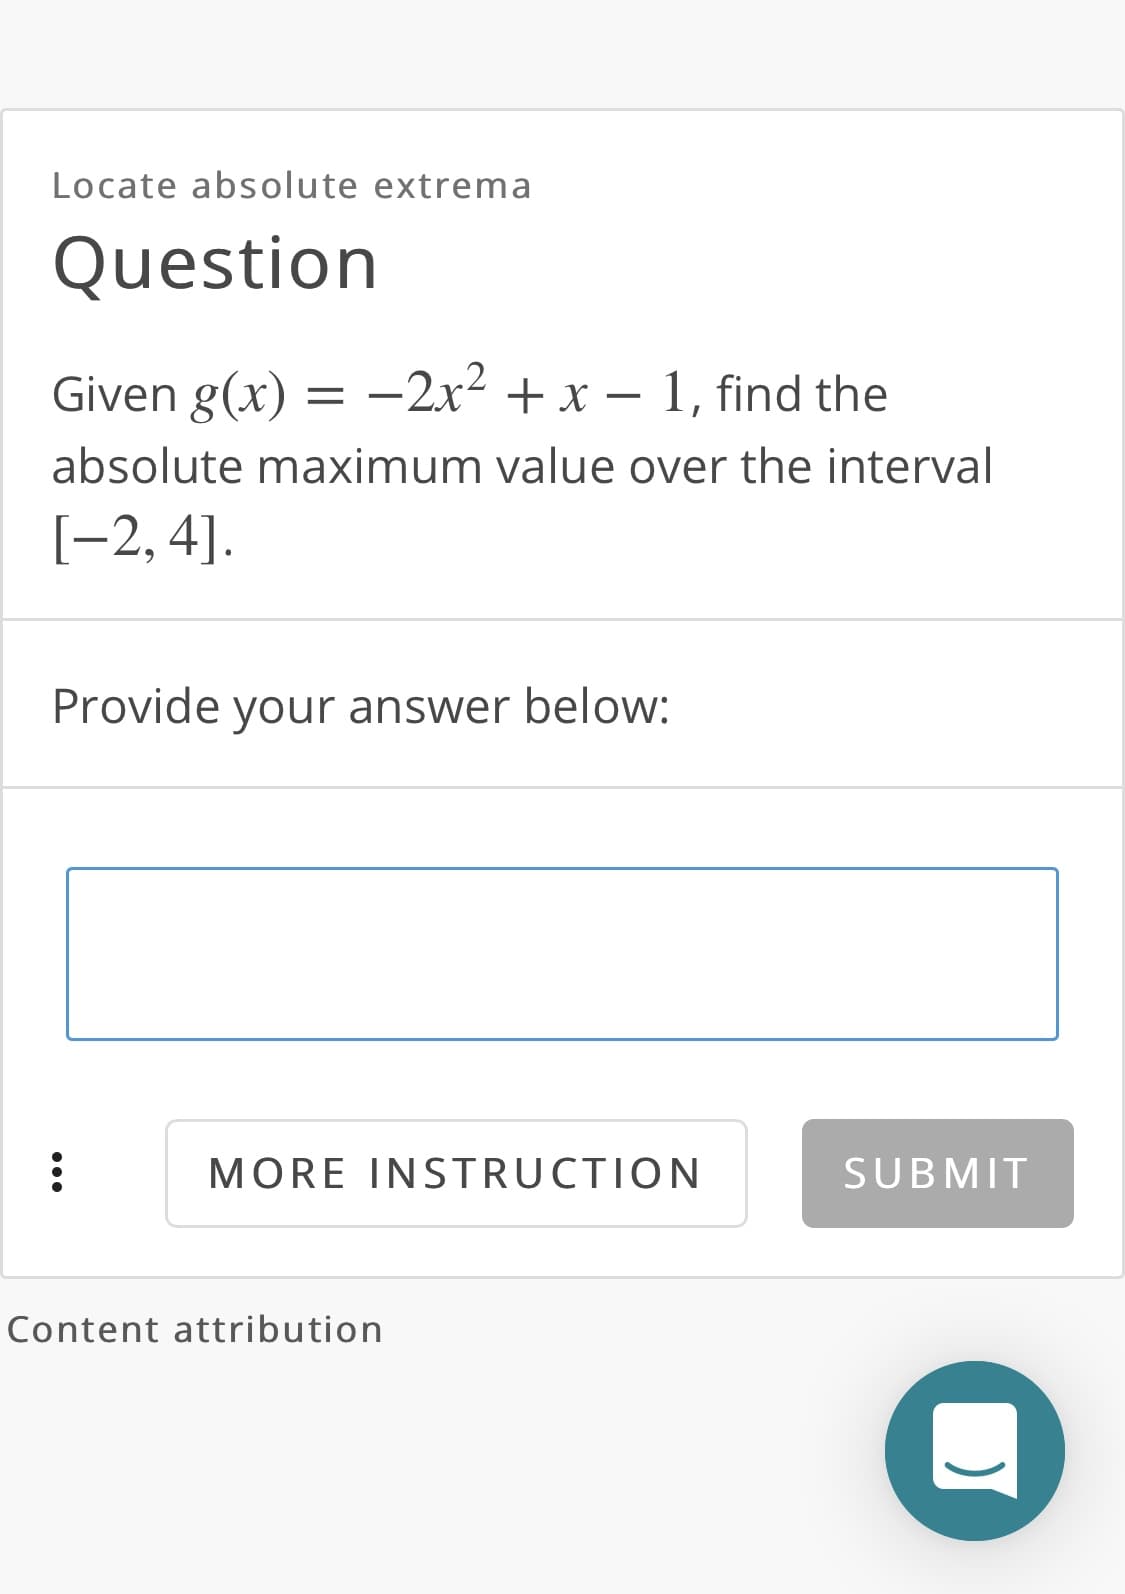 Locate absolute extrema
Question
Given g(x) =
= -2x- + x – 1, find the
absolute maximum value over the interval
[-2, 4].
Provide your answer below:
MORE INSTRUCTION
SUBMIT
Content attribution
